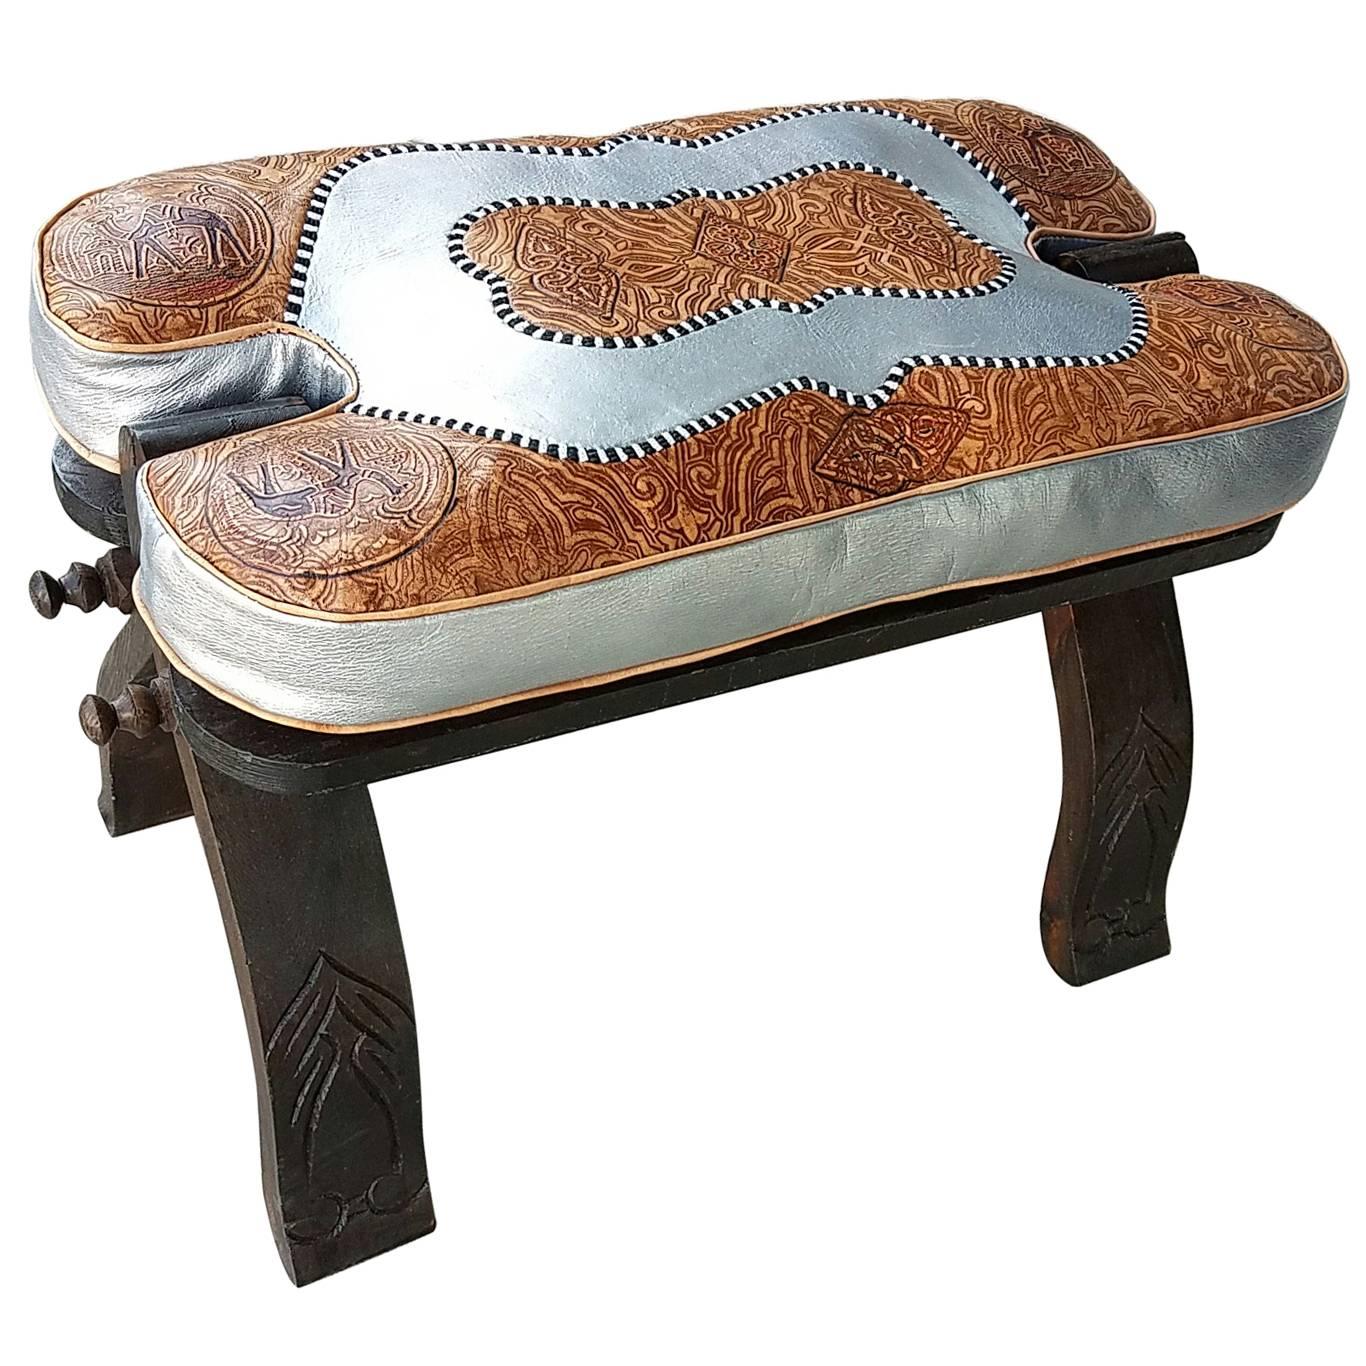 Moroccan Camel Saddle, Silver and Tan Cushion For Sale